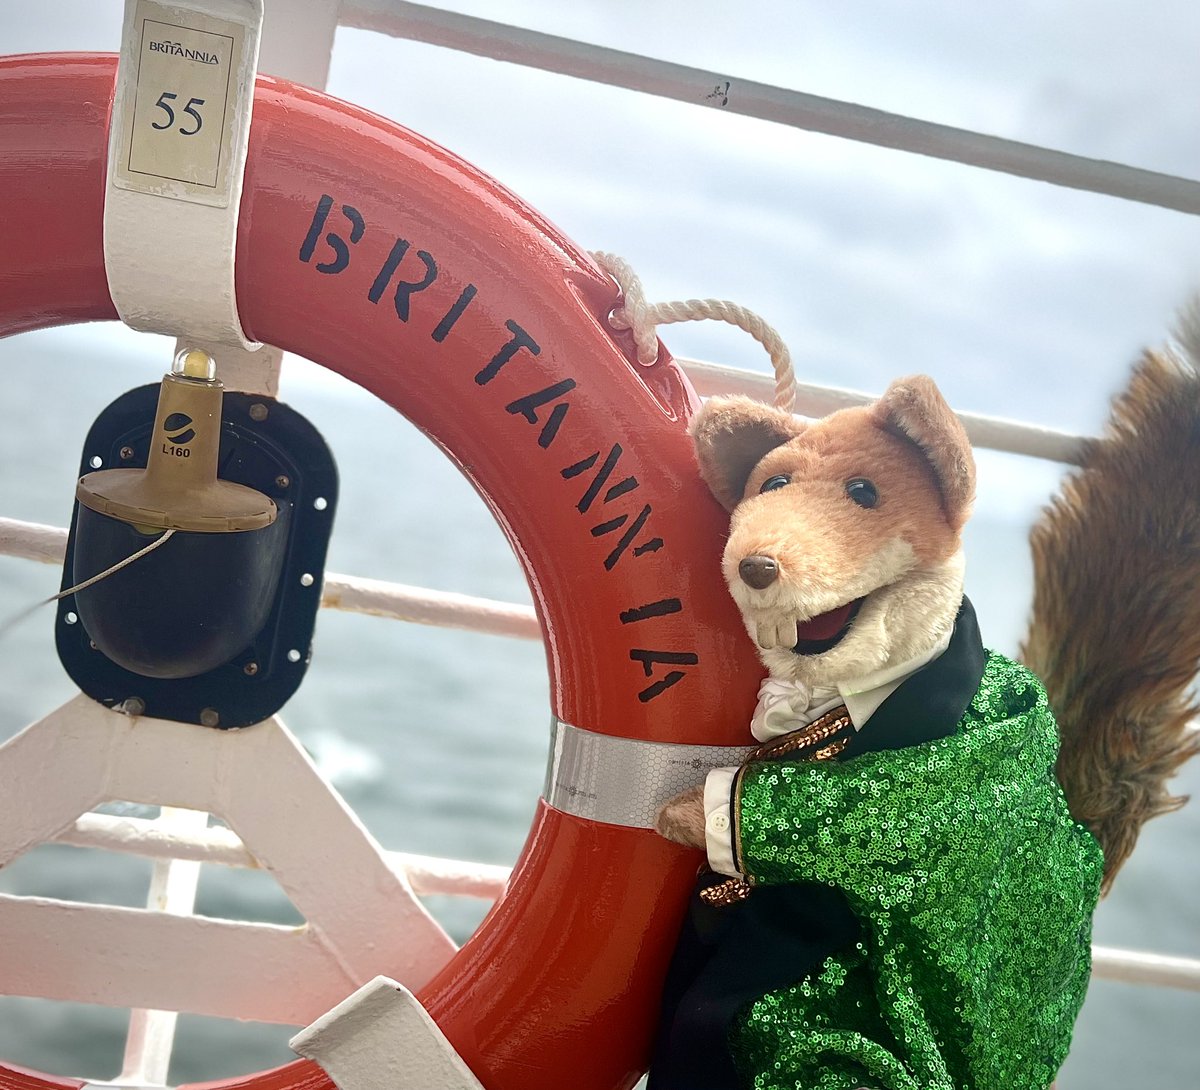 Thank you @pandocruises inviting us on Britannia. Myself & Basil had the best time! From our show in the Headliners theatre to the meet & greets…we had a ball! Look forward to the next one! #PandO #PandOcruises #britannia #britanniacruiseship #basilbrush @realbasilbrush